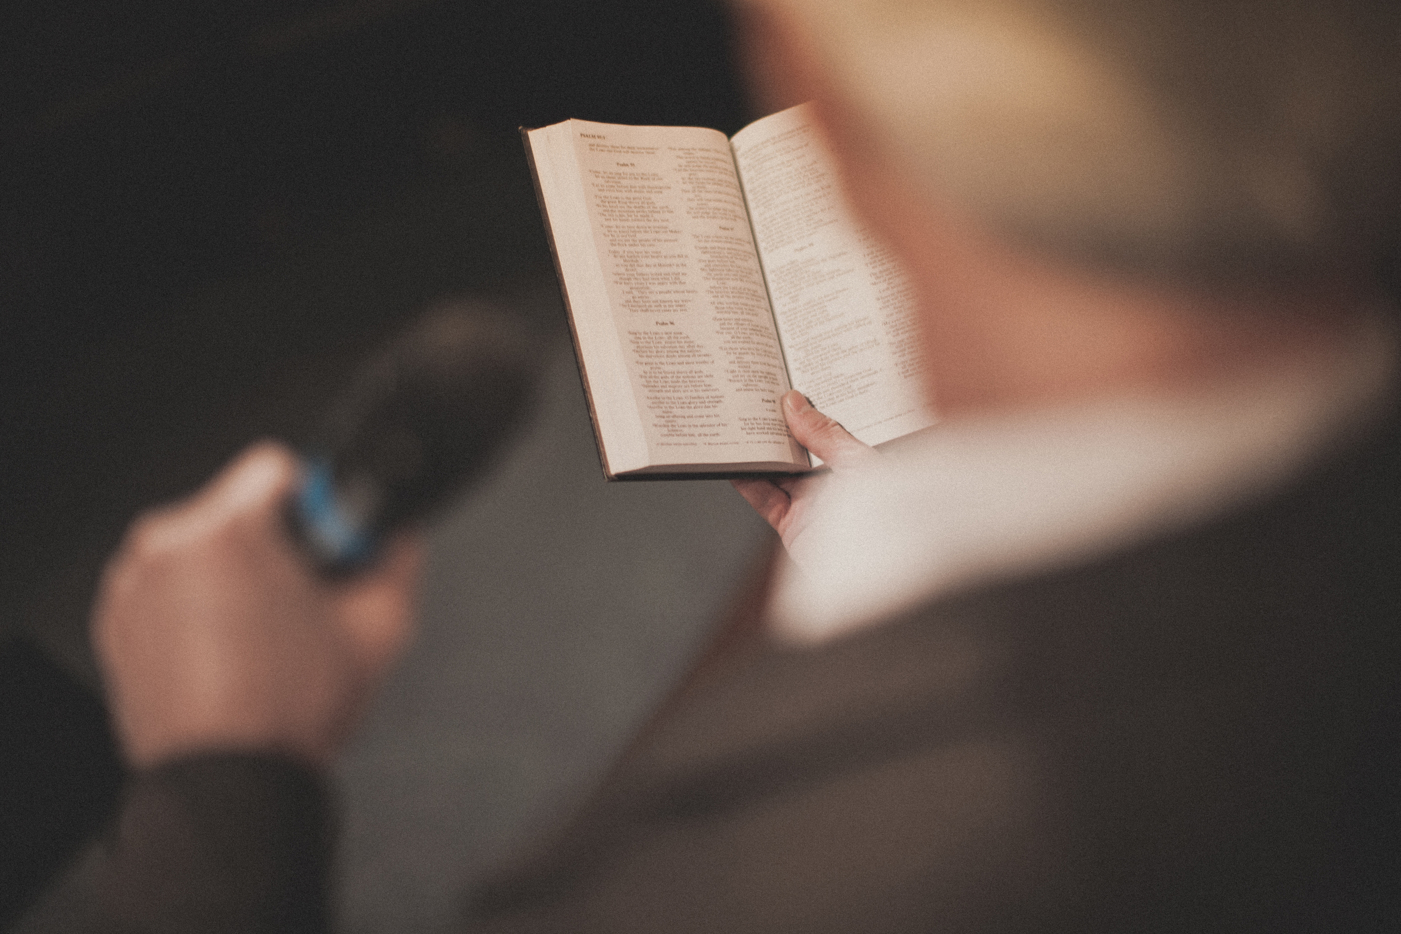 Preacher reading from the bible, holding a microphone, from behind